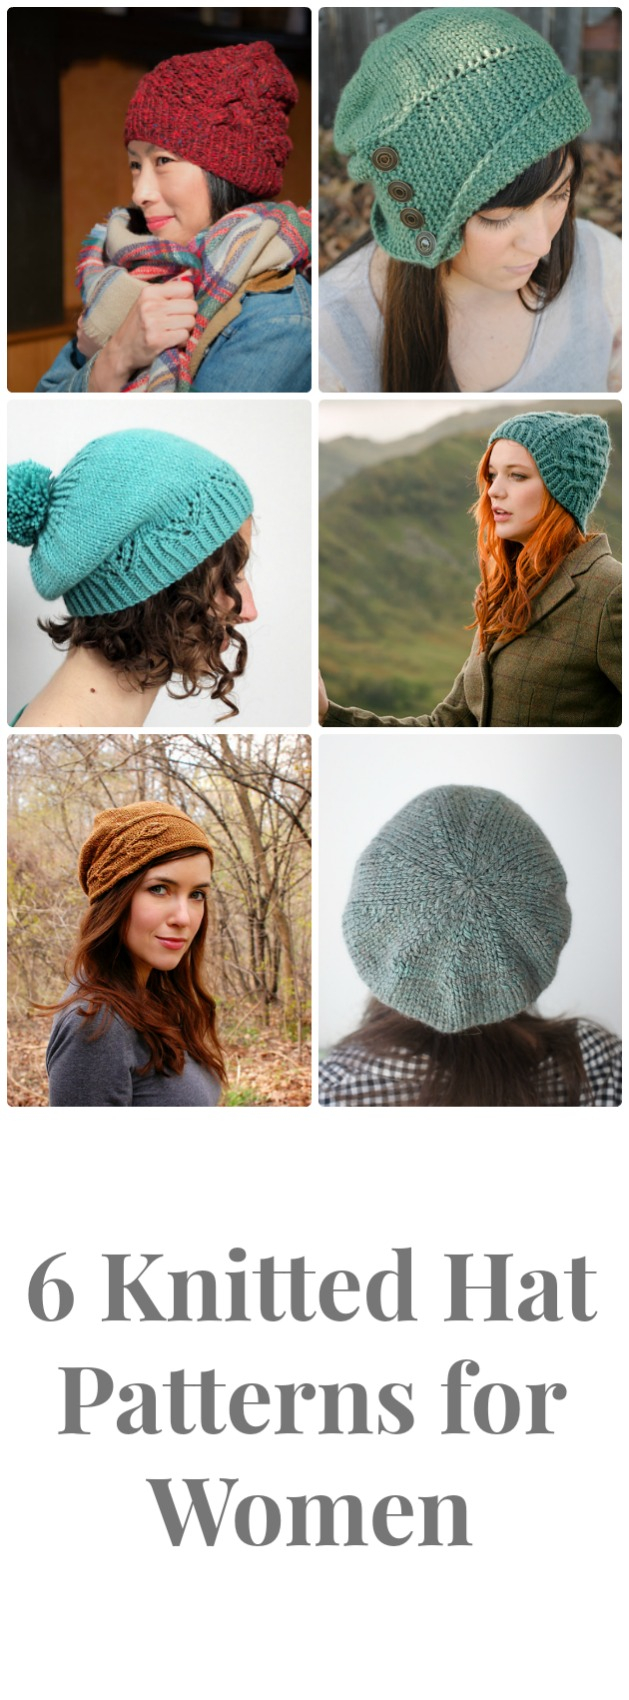 Knitted Hats Patterns 6 Knitted Hat Patterns For Women The Fibre Co